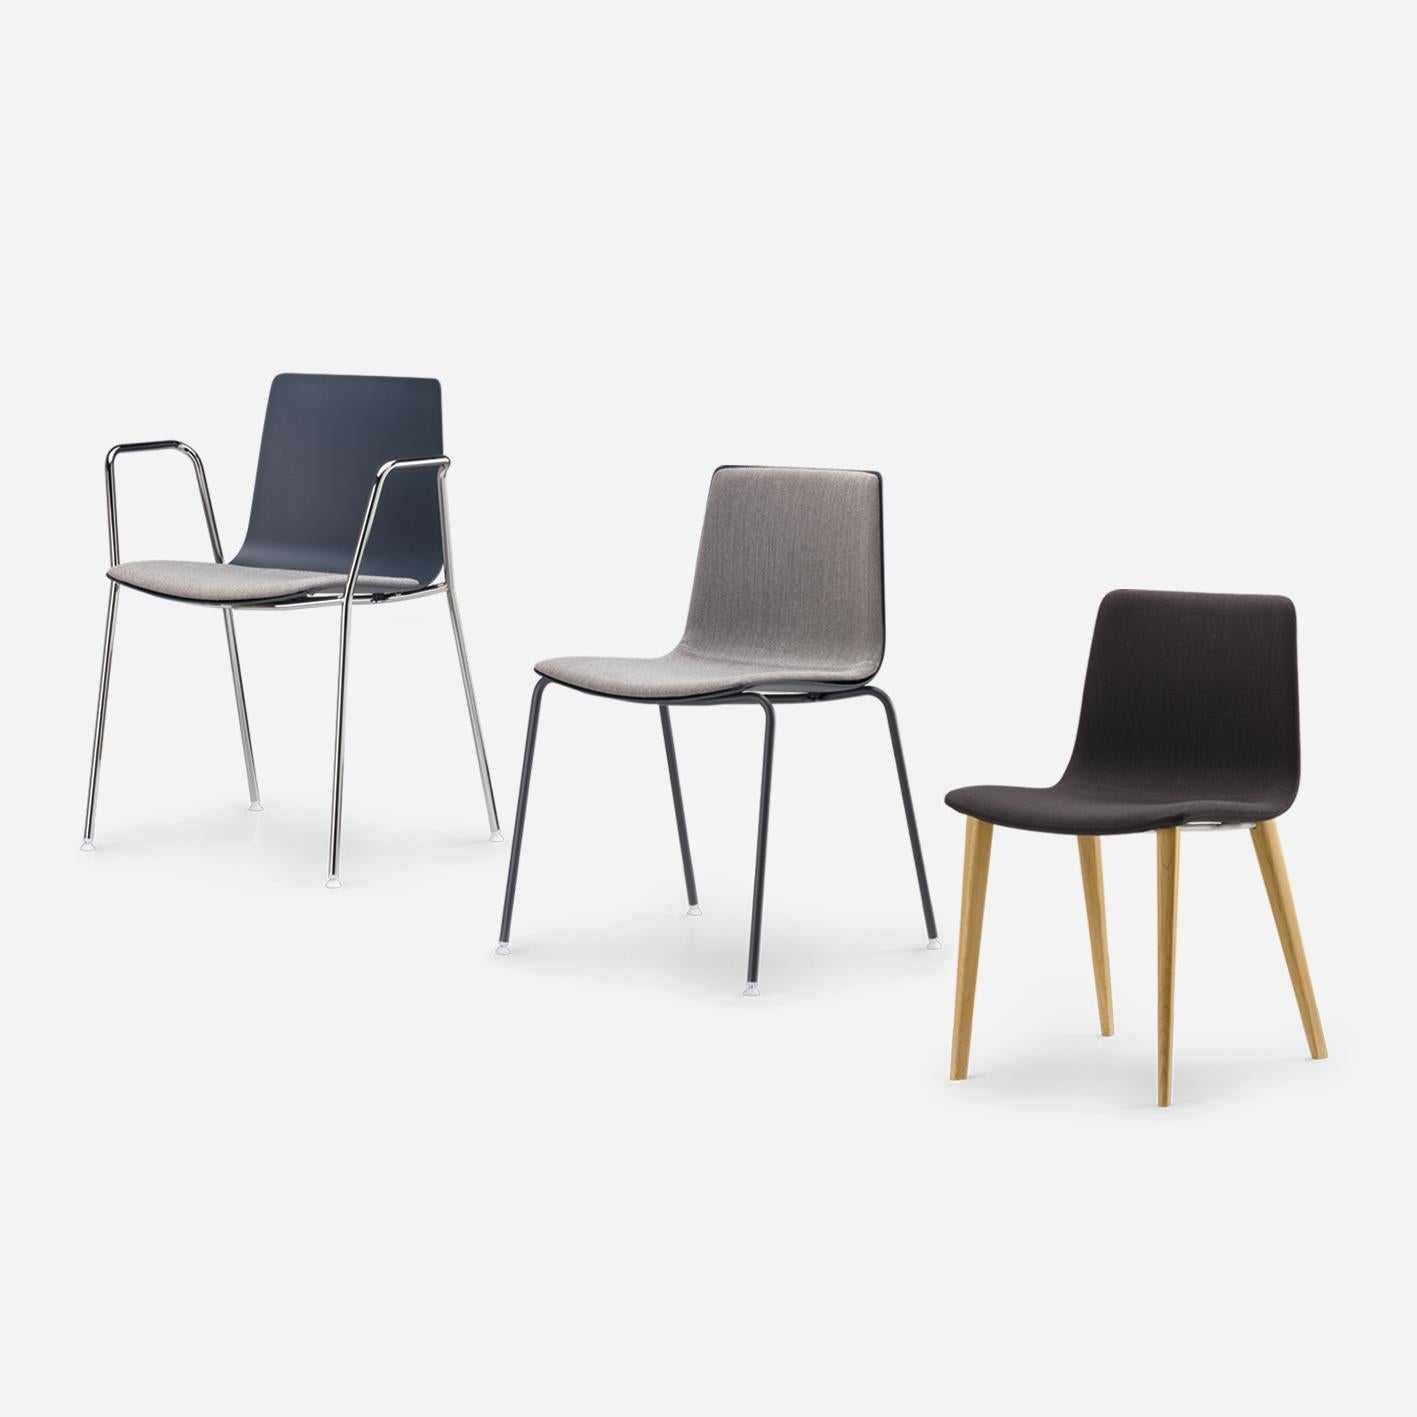 Alias 89C Slim Chair 4 Soft M in Grey Upholstered Seat and Lacquered Steel Frame by PearsonLloyd

Chair with structure in lacquered or chromed steel (stackable version on request). Shell in monochromatic polypropylene with cushion fixed to the